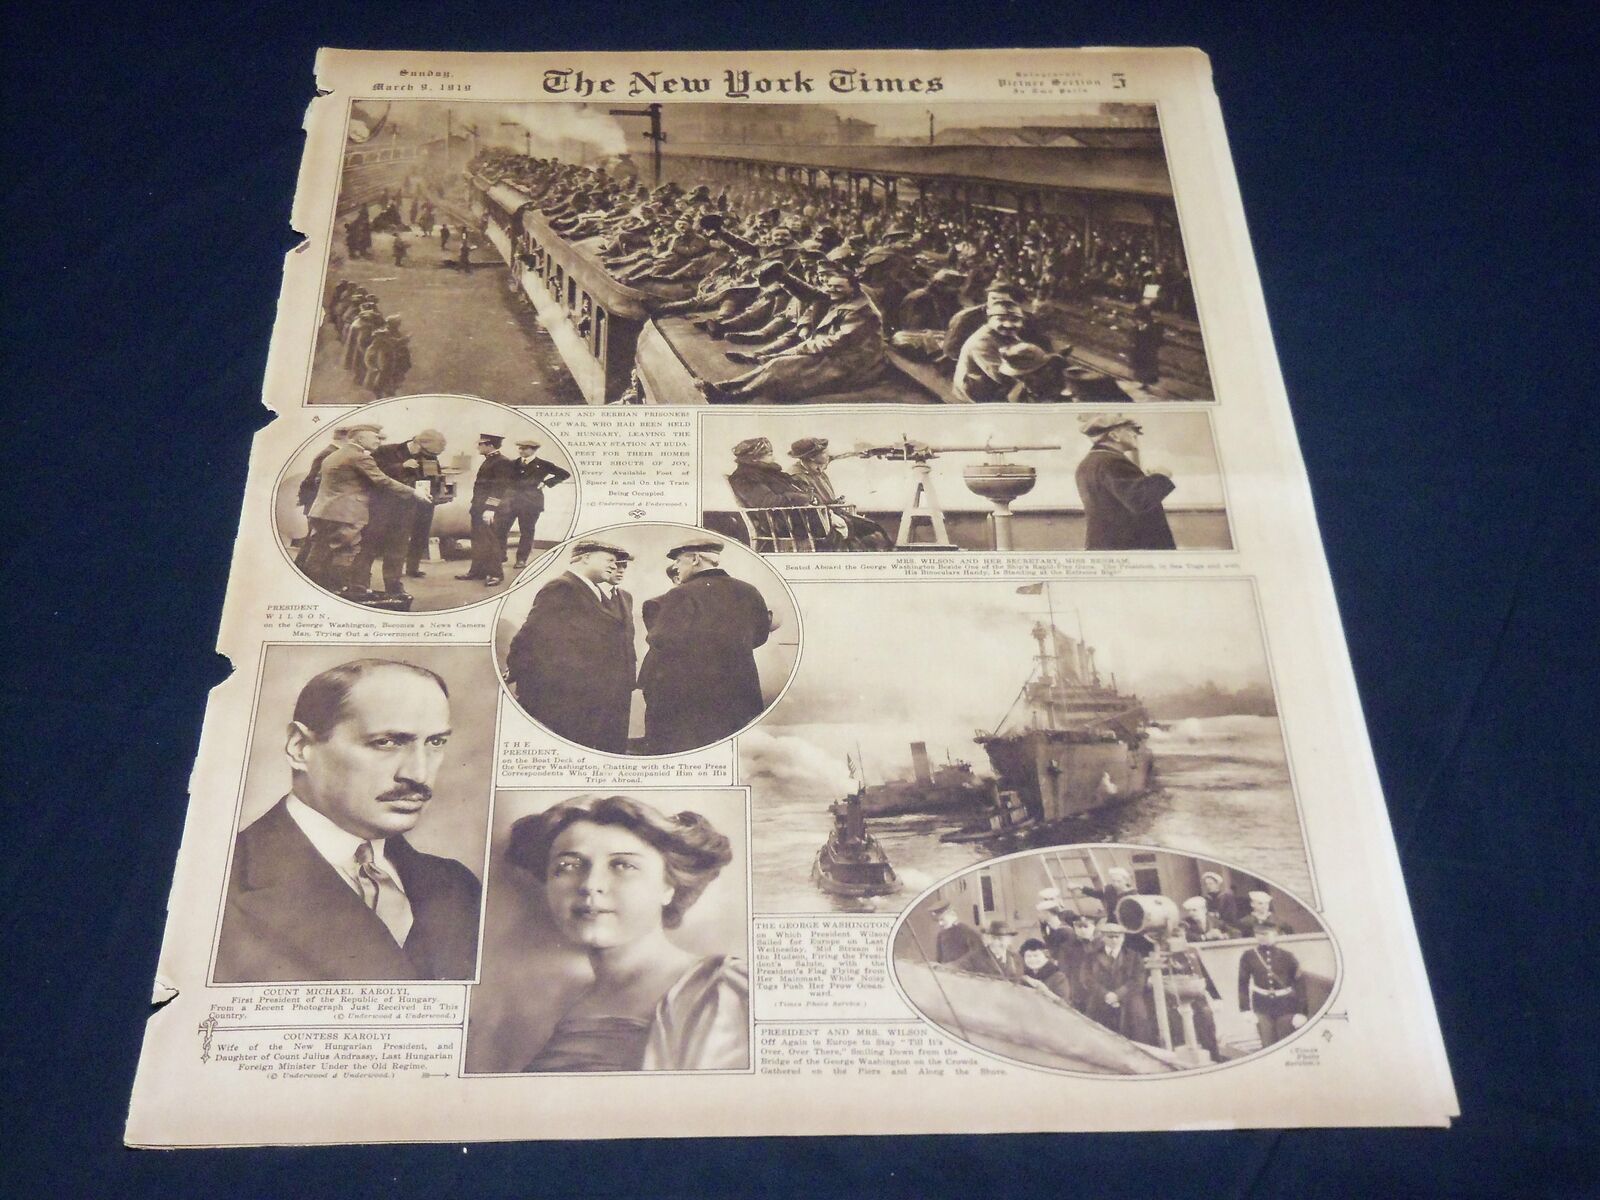 1919 MARCH 9 NEW YORK TIMES PICTURE SECTION - CURTISS AIRPLANE CO. - NT 8843